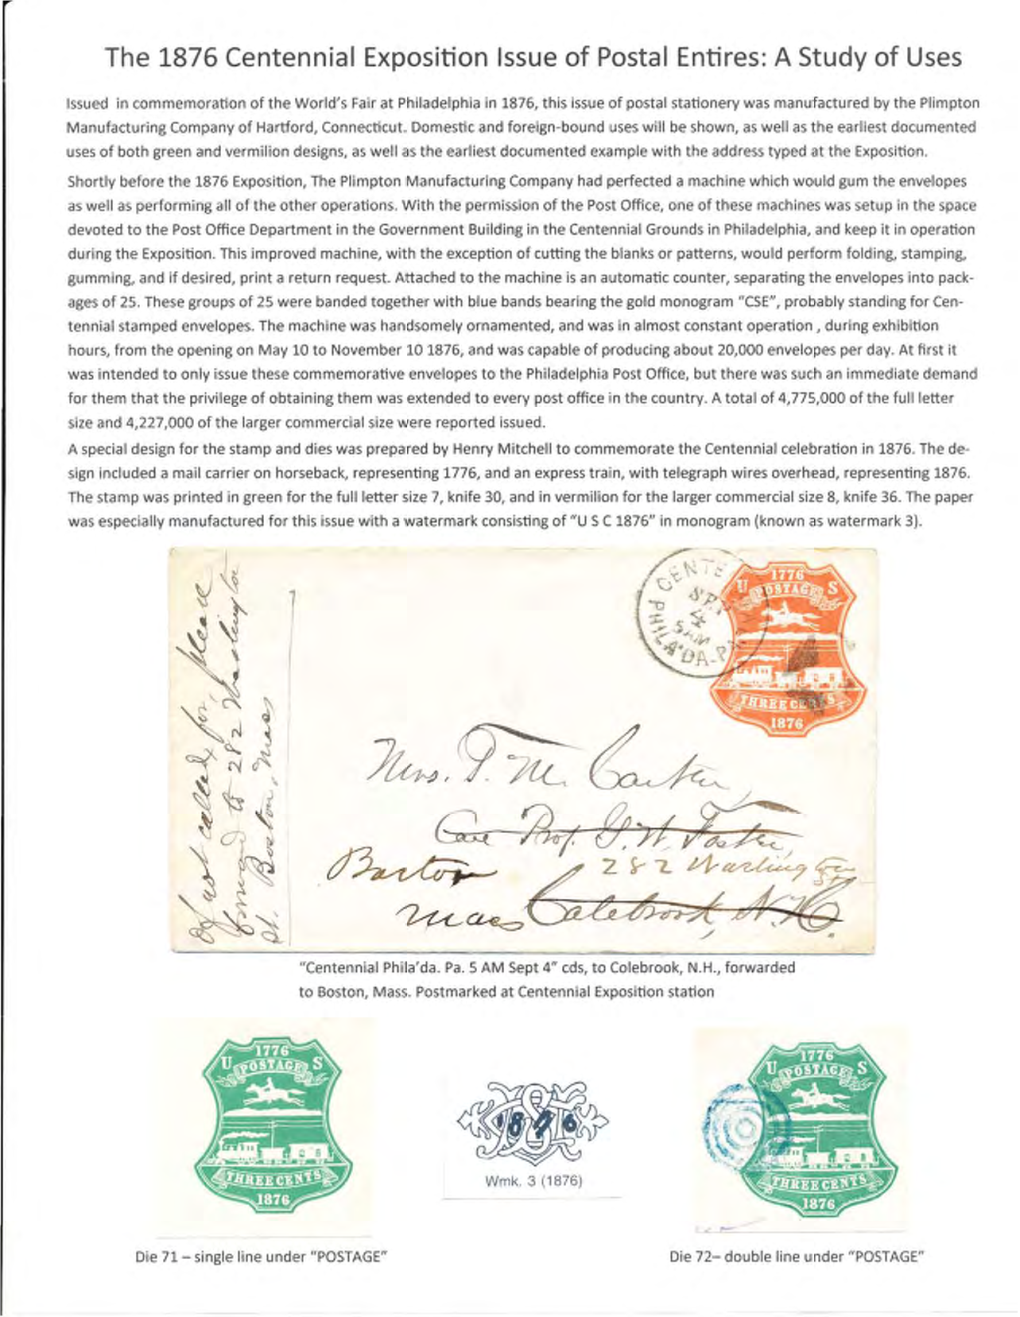 The 1876 Centennial Exposition Issue of Postal Entires: a Study of Uses